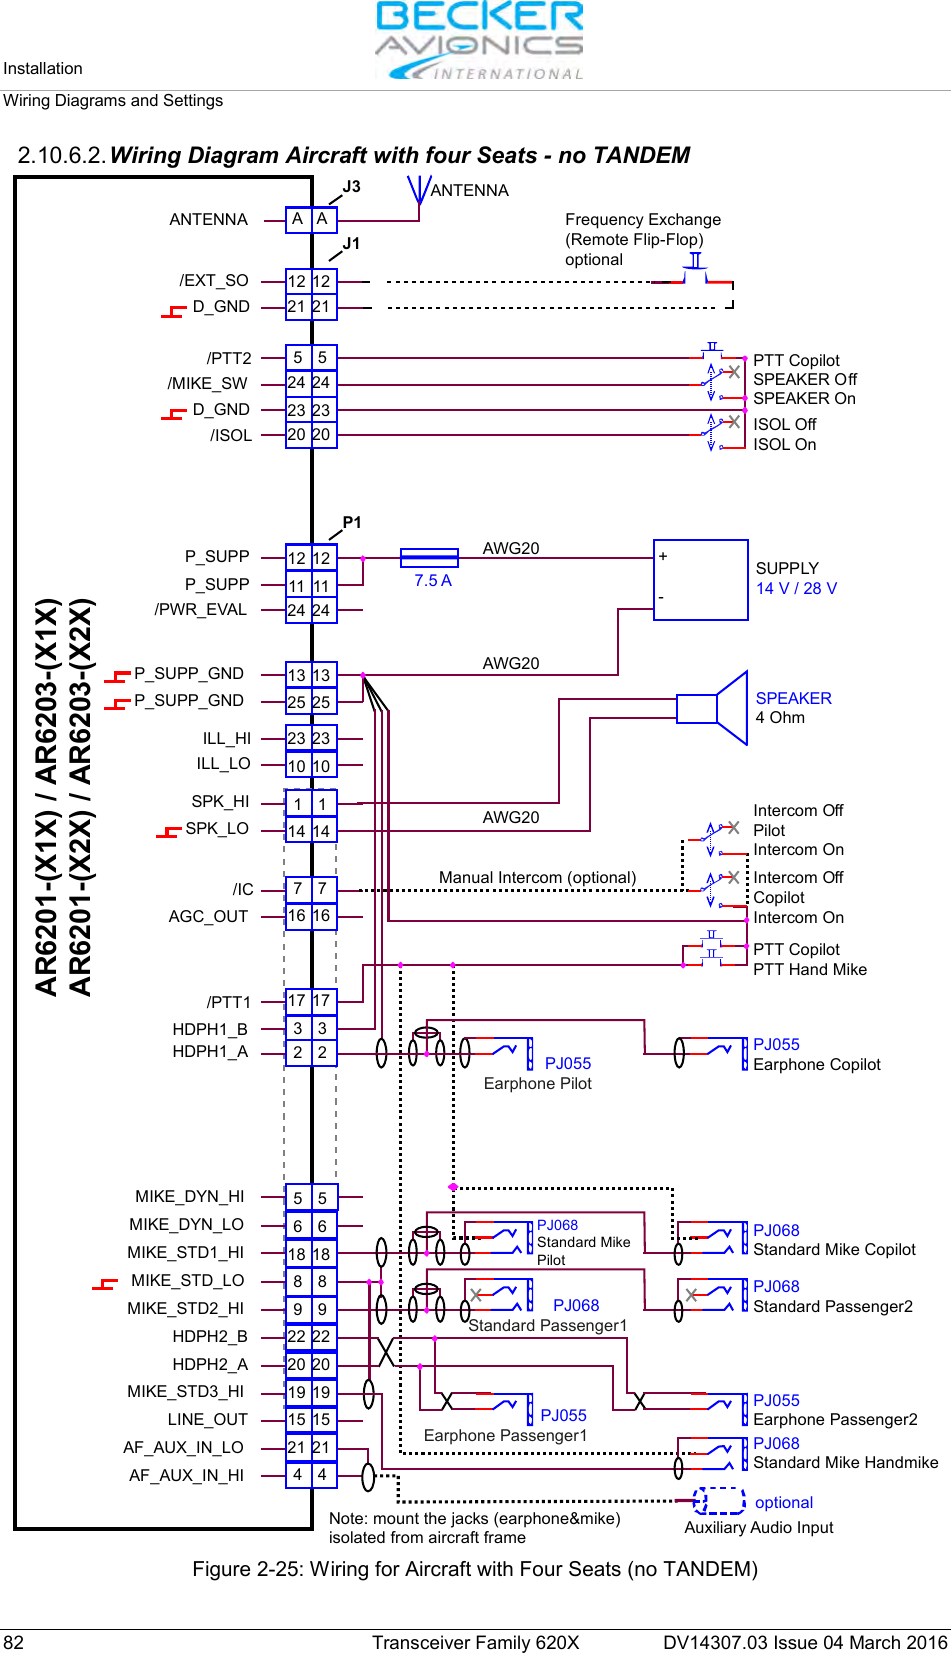 Installation   Wiring Diagrams and Settings  82 Transceiver Family 620X DV14307.03 Issue 04 March 2016 2.10.6.2. Wiring Diagram Aircraft with four Seats - no TANDEM AWG207.5 AAWG20AWG20+-SPEAKER4 OhmSUPPLY14 V / 28 VSPEAKER OffSPEAKER OnISOL OffISOL OnPTT CopilotManual Intercom (optional)PTT CopilotIntercom OffPilotIntercom OnIntercom OffCopilotIntercom OnPTT Hand MikeFrequency Exchange(Remote Flip-Flop)optionalPJ055Earphone PilotPJ055Earphone CopilotPJ055Earphone Passenger2PJ055Earphone Passenger1PJ068Standard Passenger1PJ068Standard Passenger2PJ068Standard Mike CopilotPJ068Standard MikePilotPJ068Standard Mike HandmikeAuxiliary Audio InputNote: mount the jacks (earphone&amp;mike)isolated from aircraft frameoptionalAR6201-(X1X) / AR6203-(X1X)AR6201-(X2X) / AR6203-(X2X)ANTENNAJ3J1P1AA12 1221 215 524 2423 2320 2012 1211 1124 241 114 147 716 1617 173 32 25 56 618 188 89 922 2220 2019 1915 1521 214 423 2310 1013 1325 25ILL_HISPK_HISPK_LO/ICAGC_OUT/PTT1HDPH1_BHDPH1_AHDPH2_BHDPH2_AMIKE_DYN_LOMIKE_DYN_HIMIKE_STD1_HIMIKE_STD2_HIMIKE_STD3_HILINE_OUTAF_AUX_IN_LOAF_AUX_IN_HIMIKE_STD_LOILL_LOP_SUPPP_SUPP_GNDP_SUPP_GNDP_SUPP/PWR_EVALANTENNA/EXT_SO/PTT2/MIKE_SWD_GNDD_GND/ISOL Figure 2-25: Wiring for Aircraft with Four Seats (no TANDEM)  